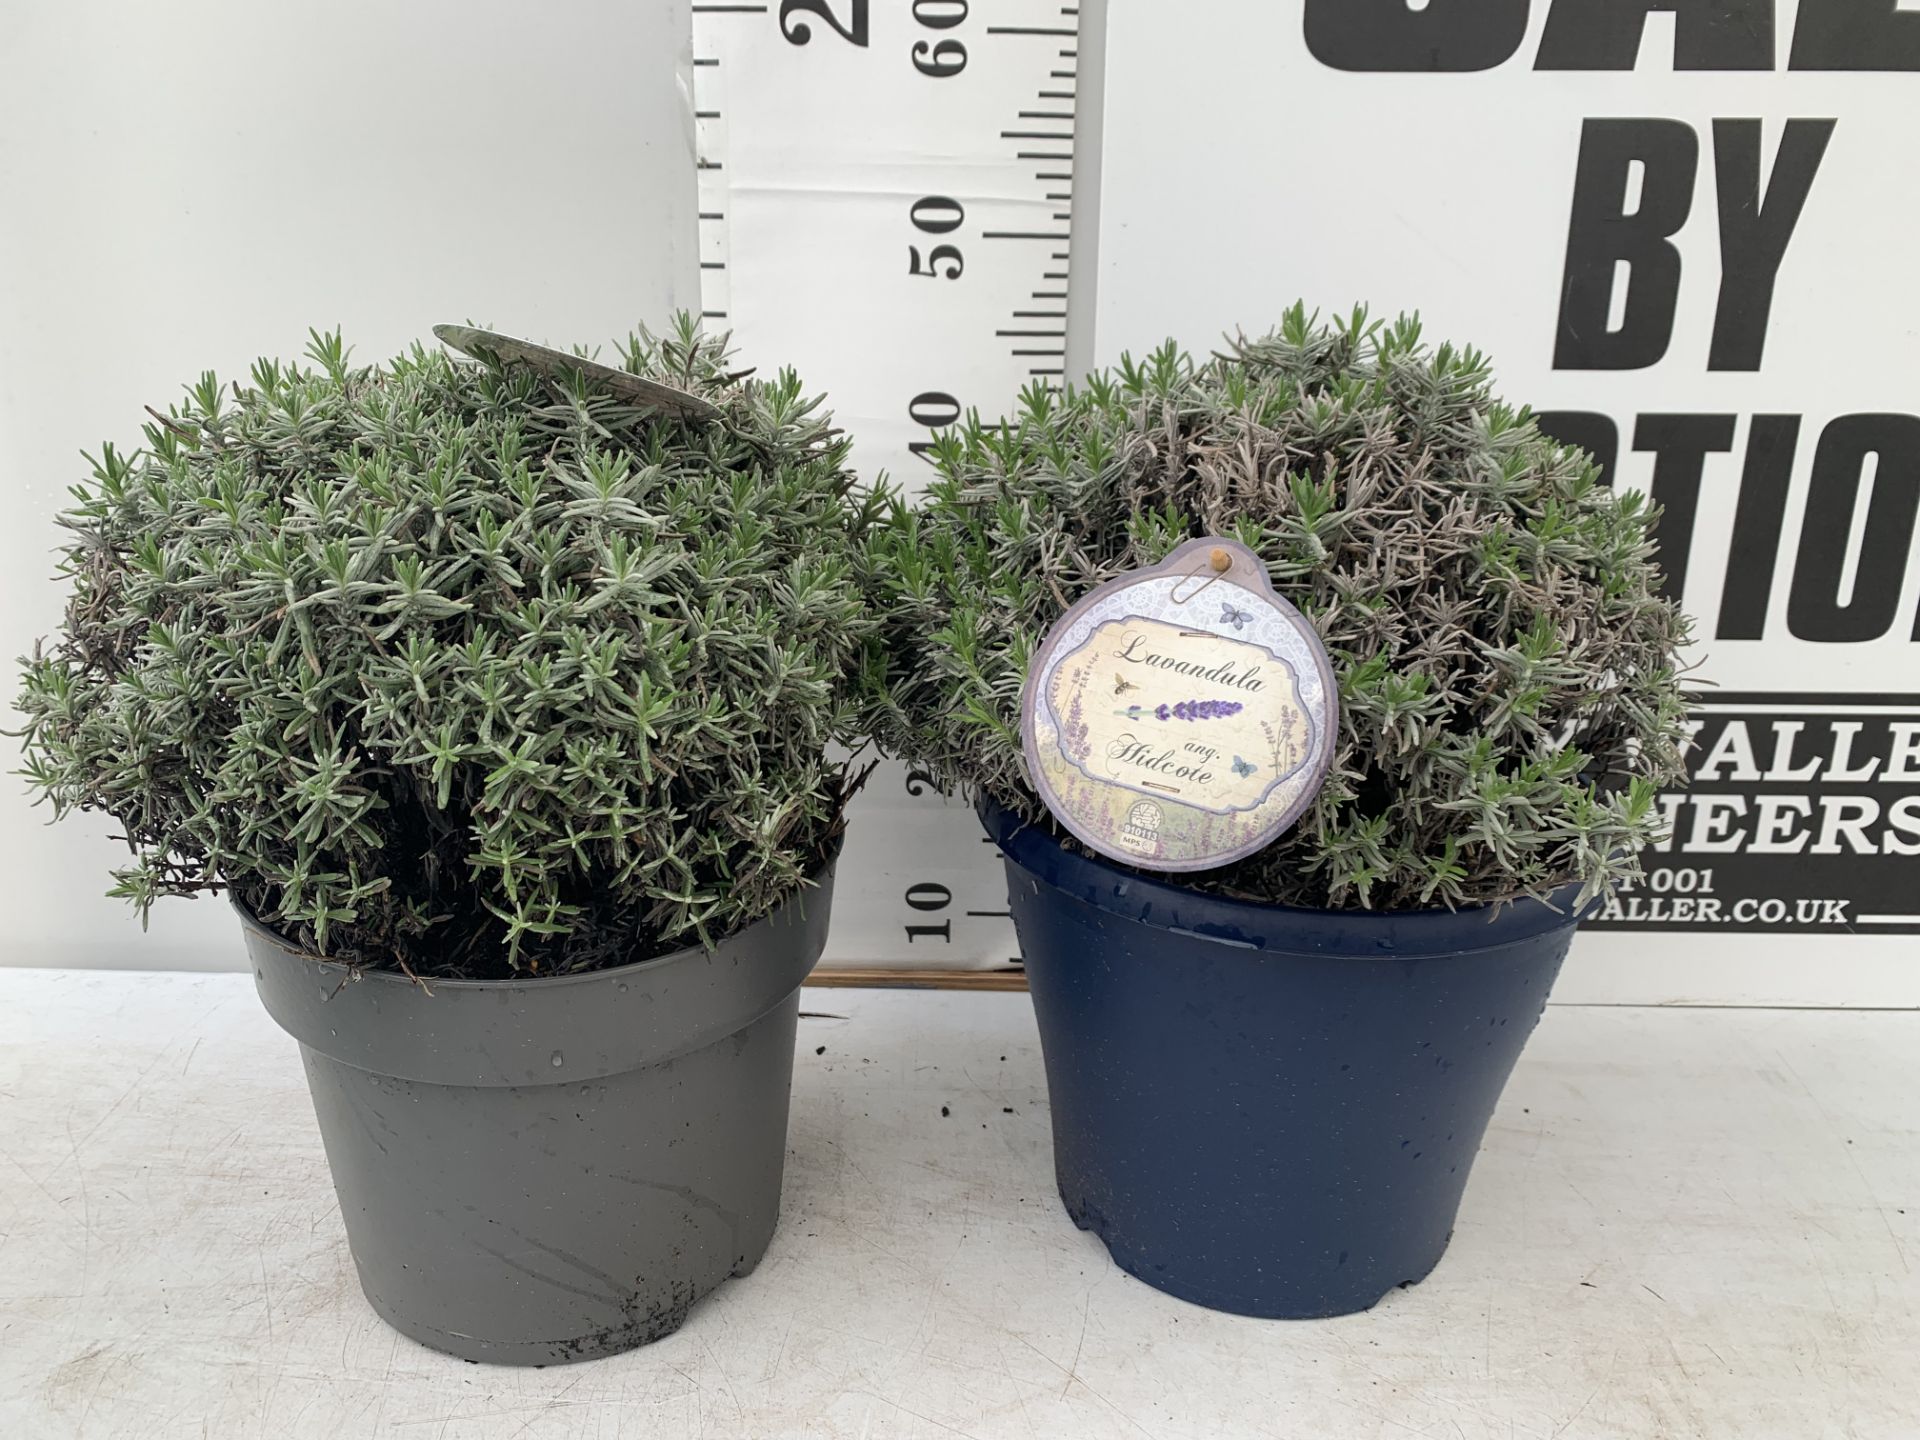 TWO LAVENDER 'HIDCOTE' IN 5 LTR POTS APPROX 40CM IN HEIGHT IN 5 LTR POTS TO BE SOLD FOR THE TWO